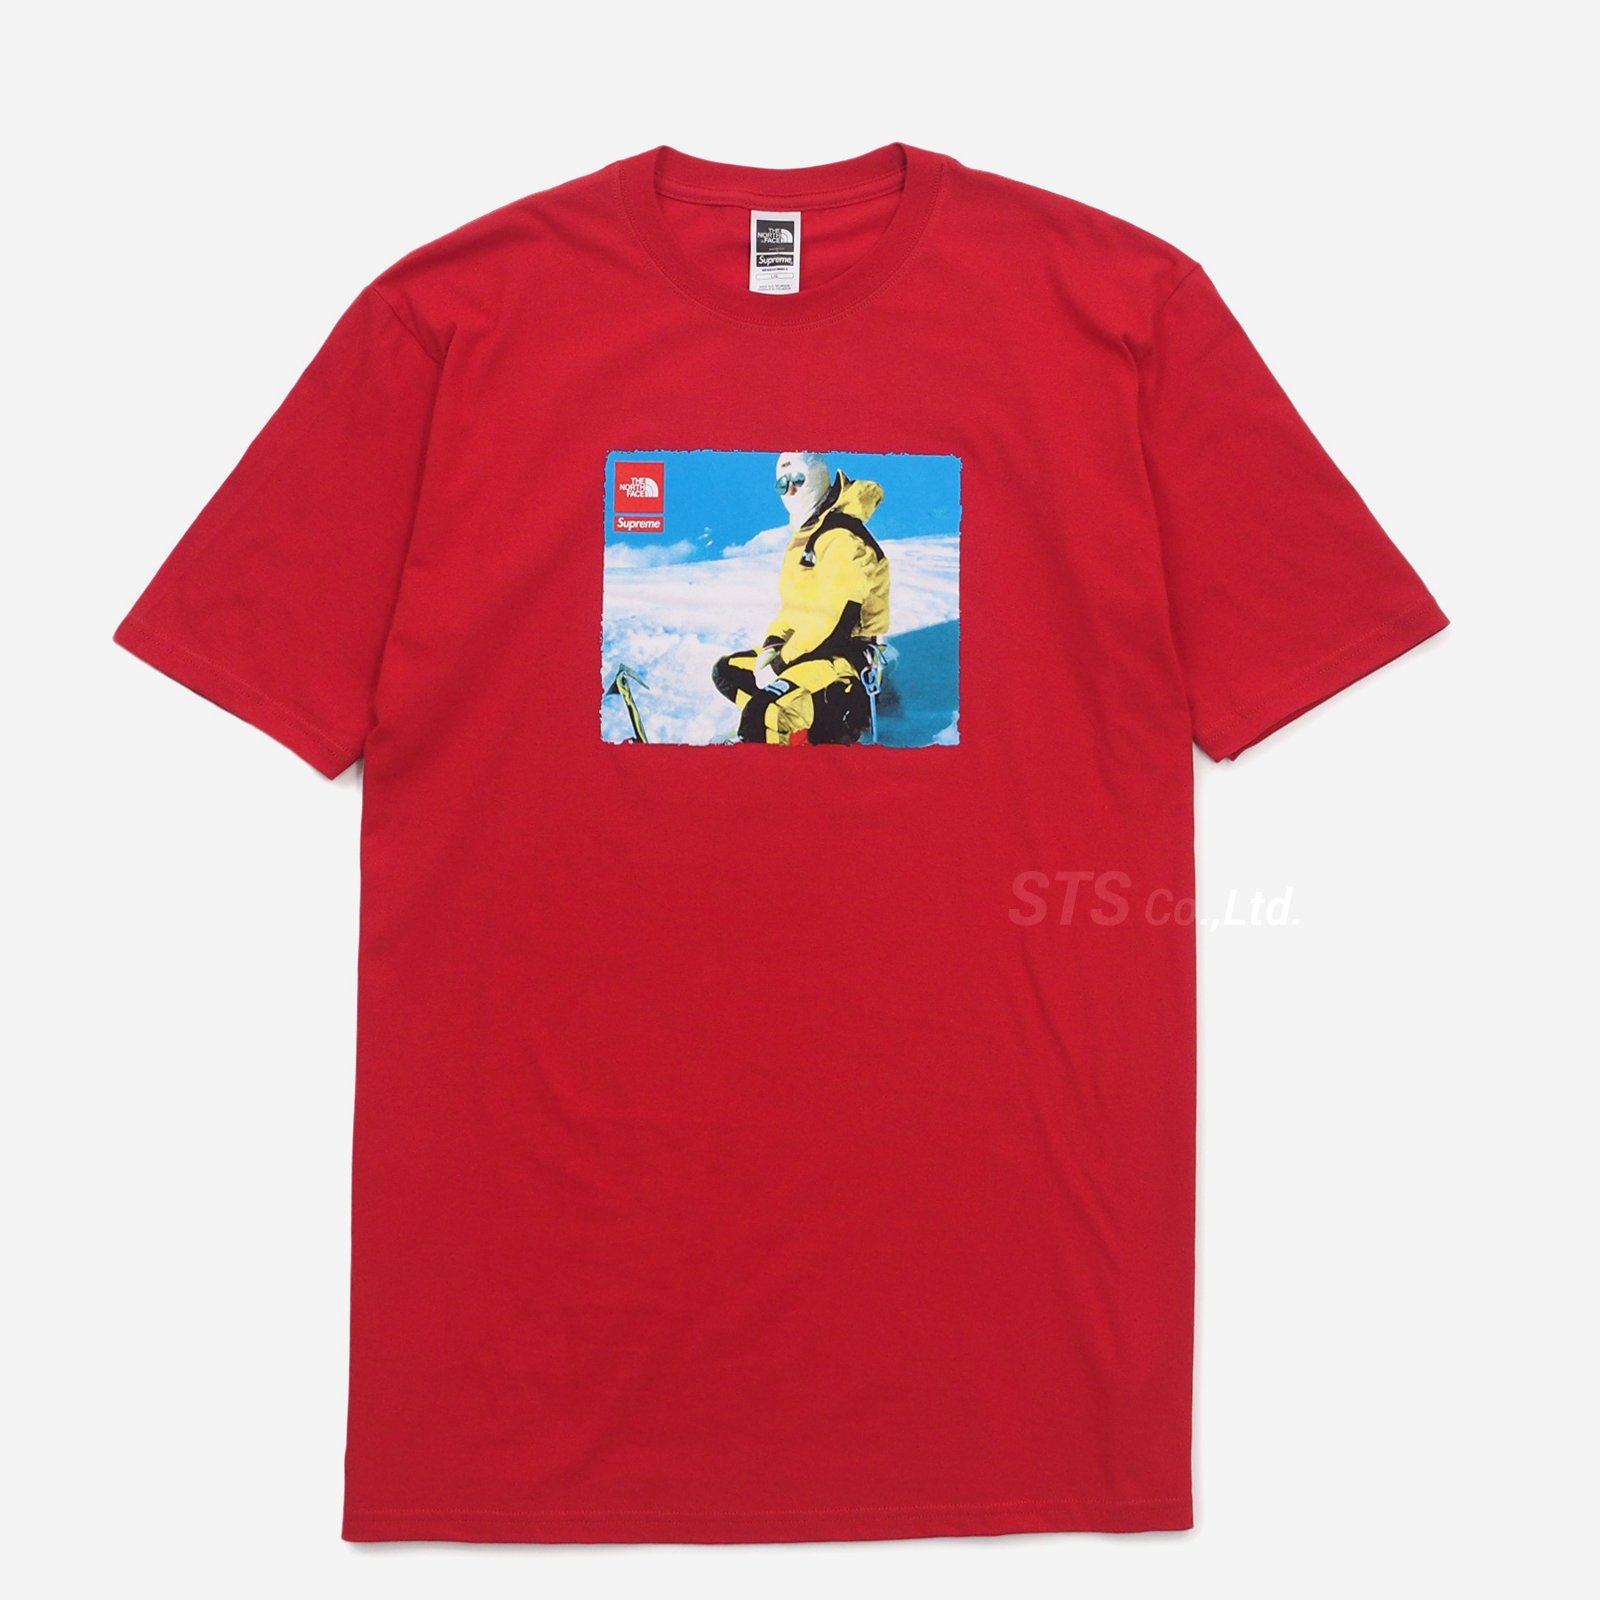 Supreme/The North Face Photo Tee - ParkSIDER